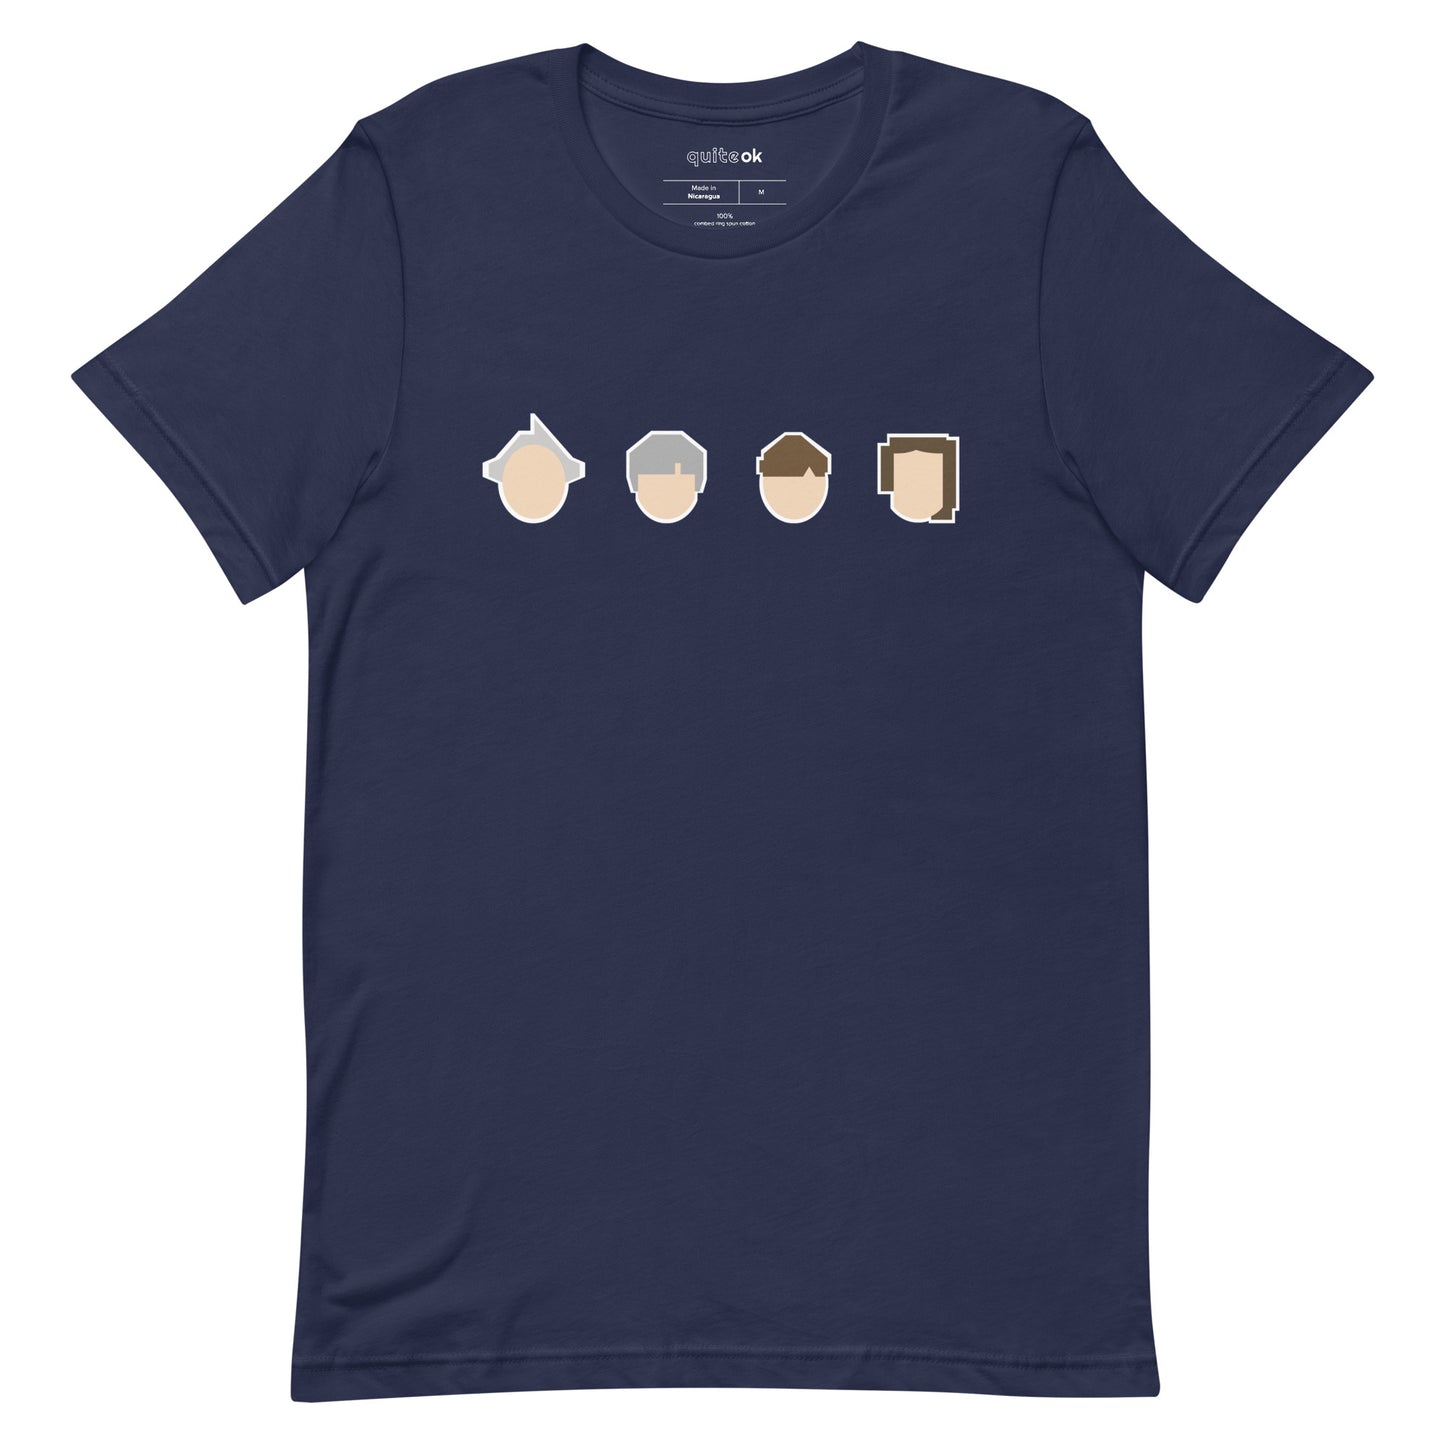 Father Ted Heads Comedy T-Shirt